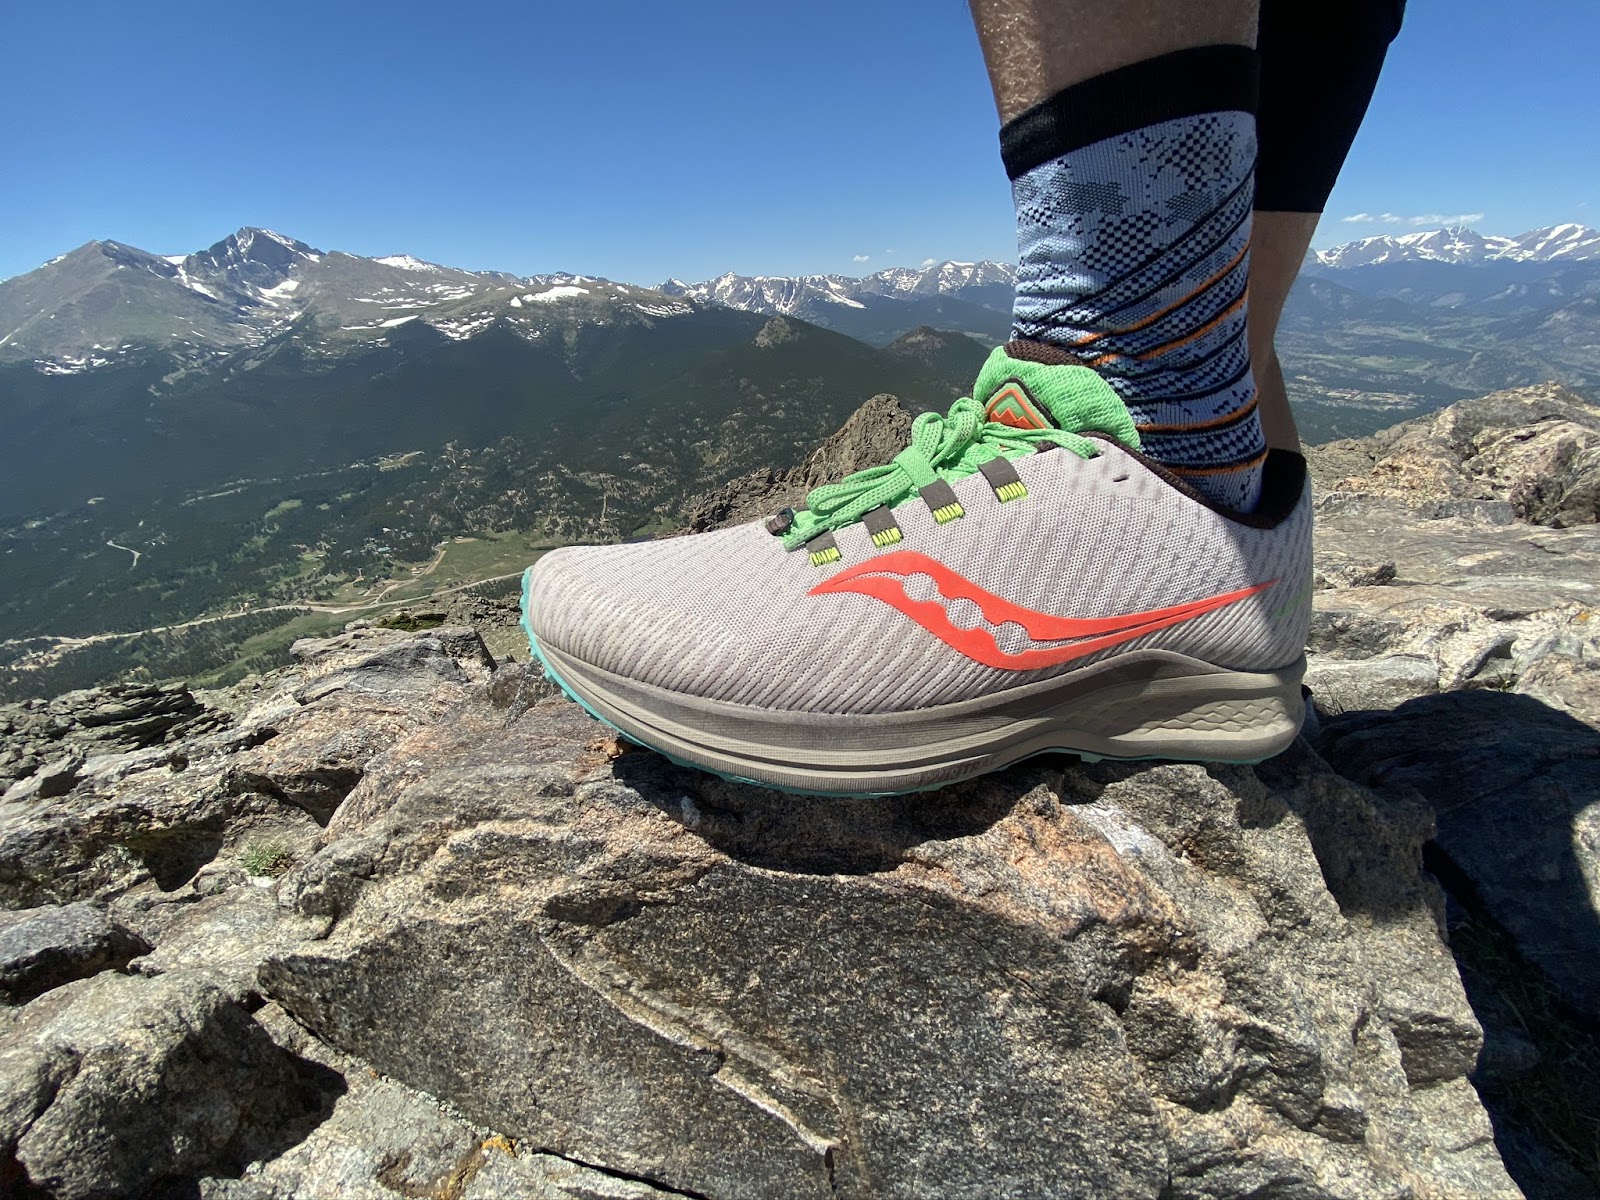 Road Trail Run: Saucony Canyon TR Multi Tester Review: A New Max Cushion  Door to Trail Option